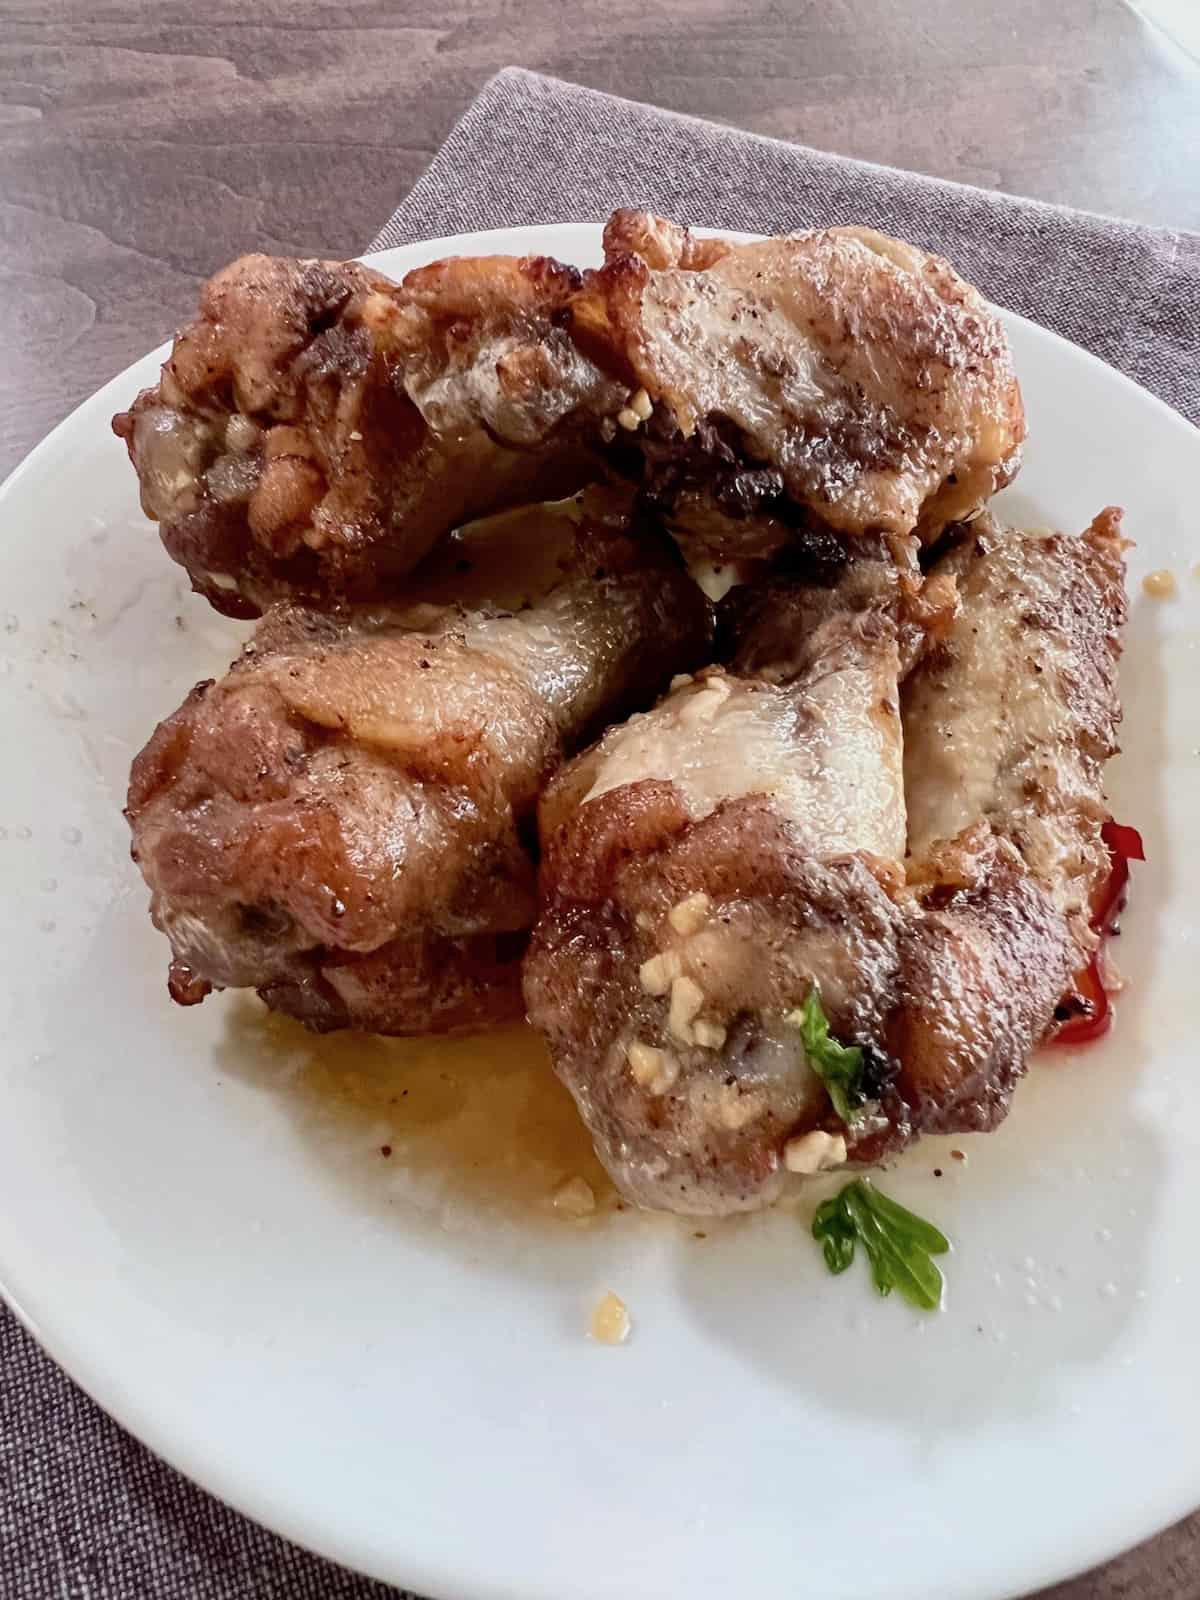 How Long to Deep Fry Chicken Wings? Plated and ready to eat with sauce.